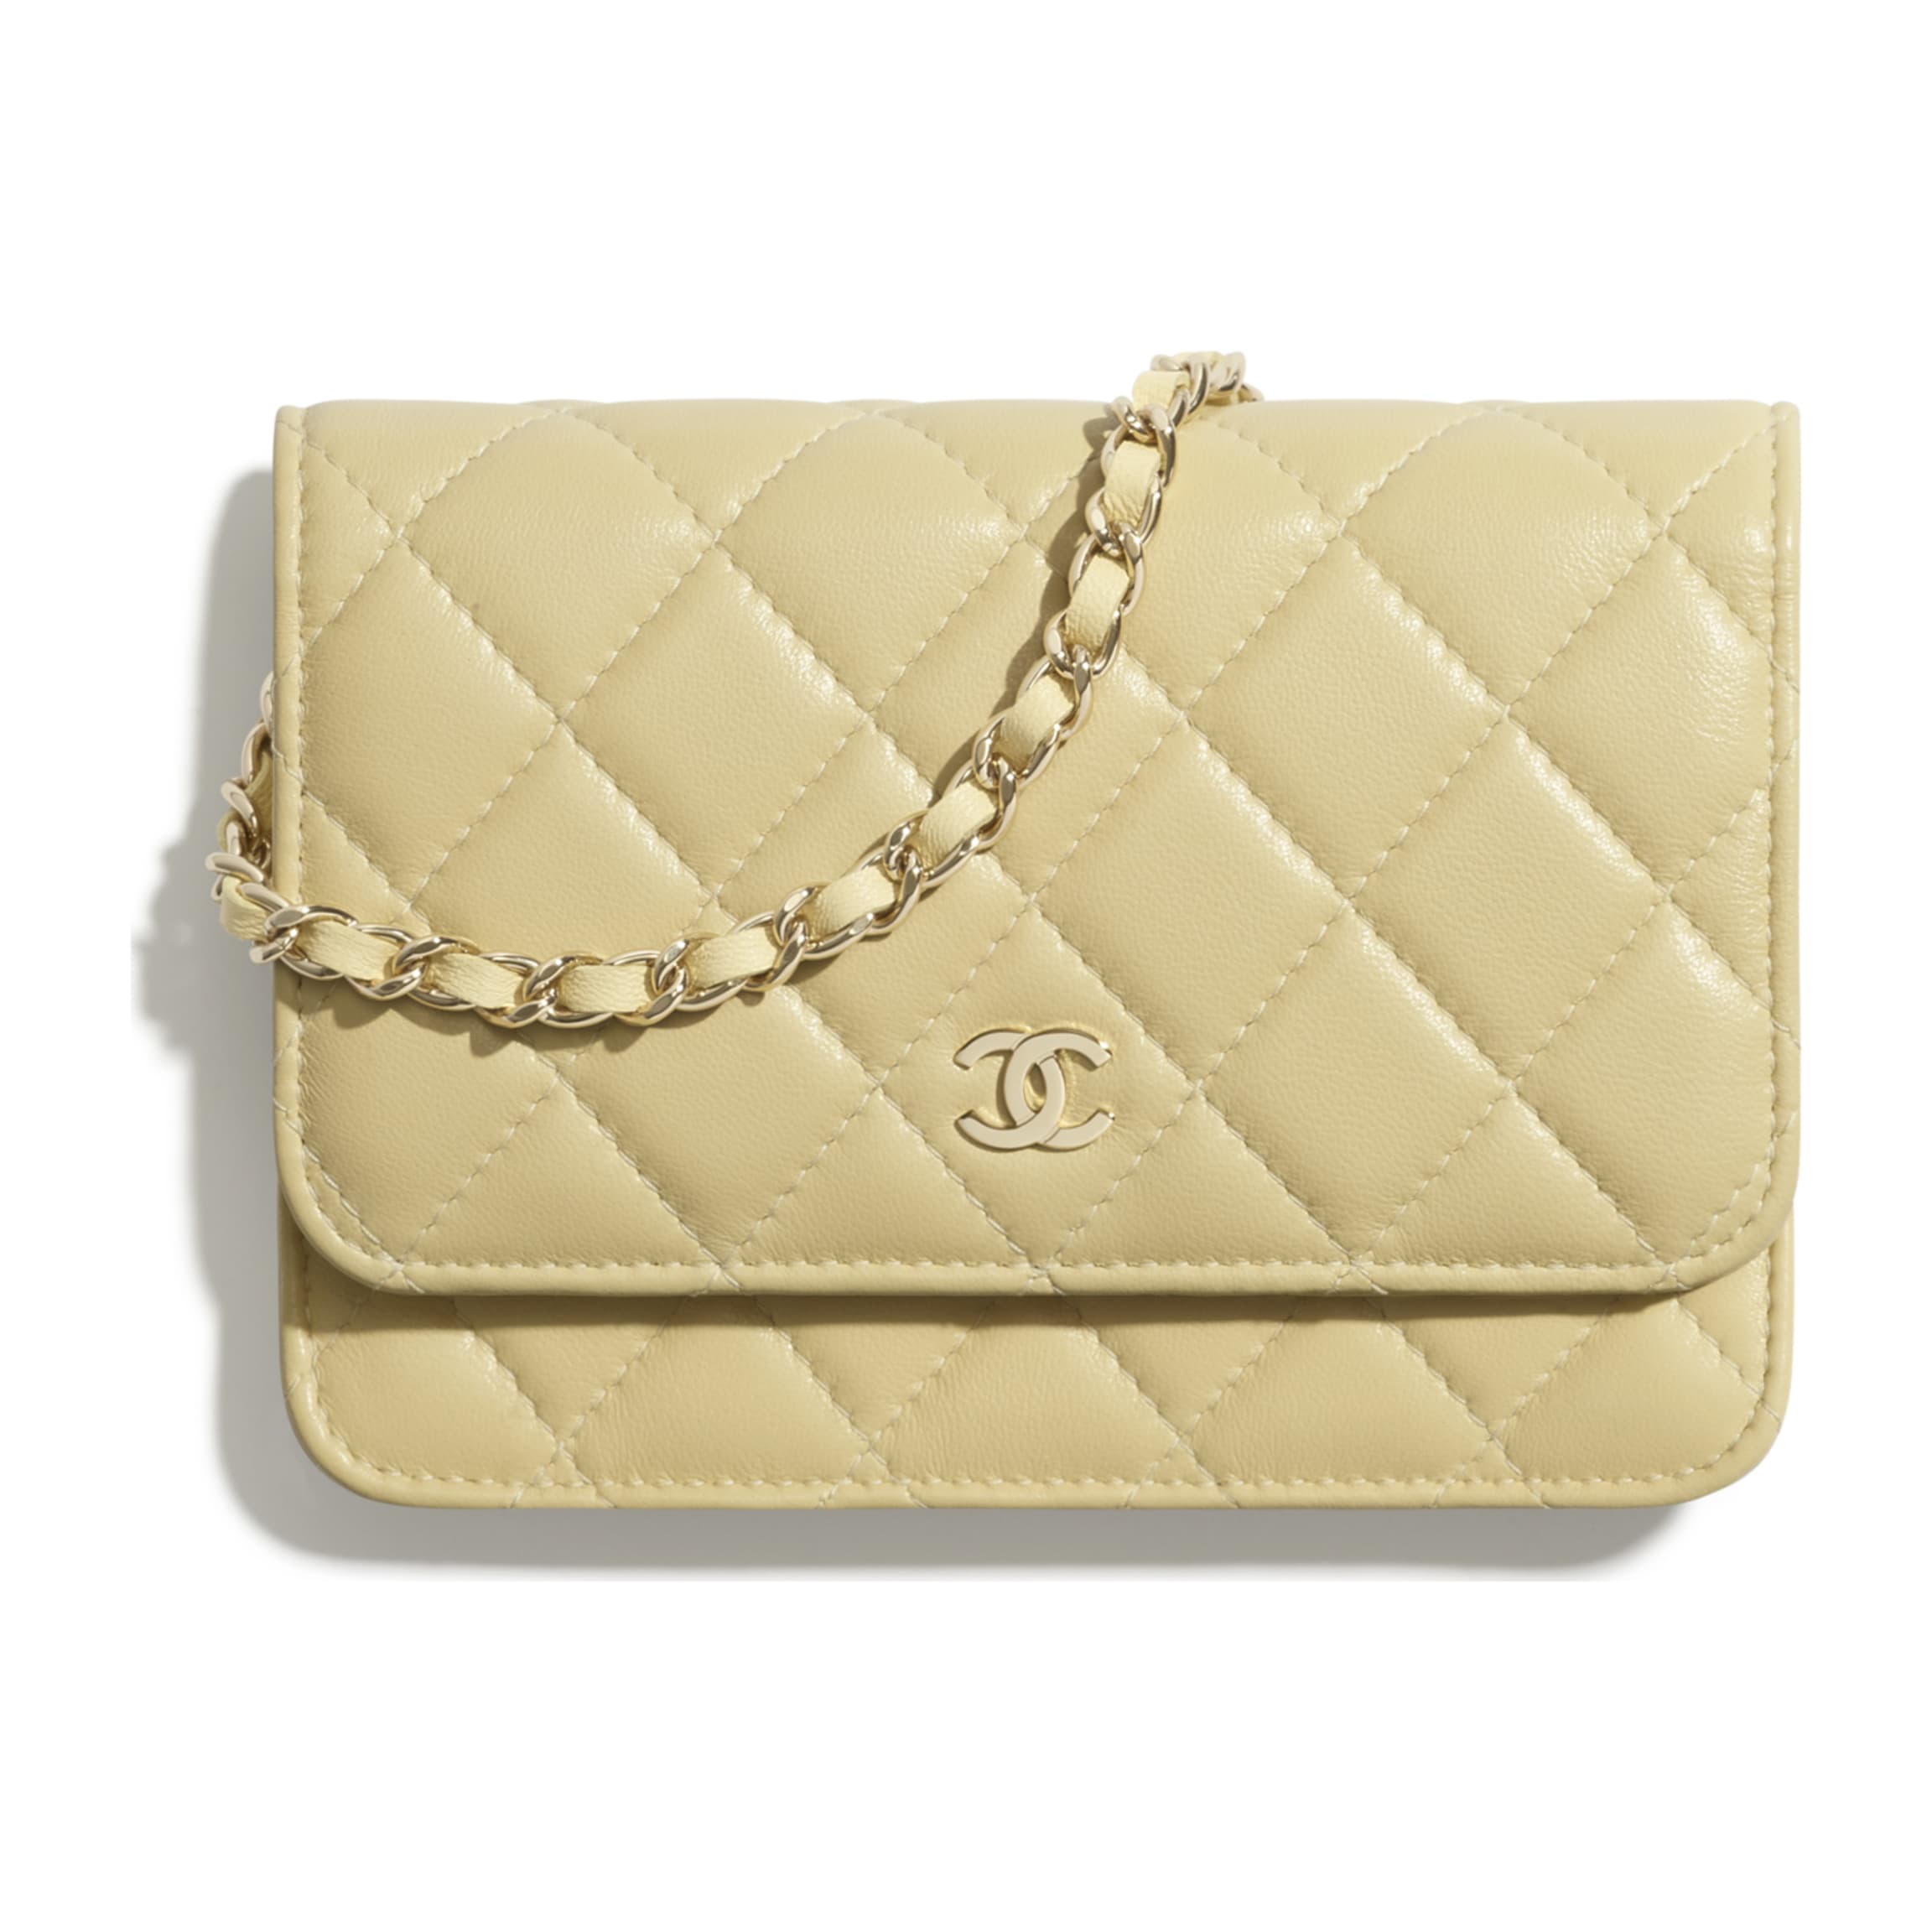 Wardrobe Essentials: What Purses Should Every Woman Own? Chanel WOC